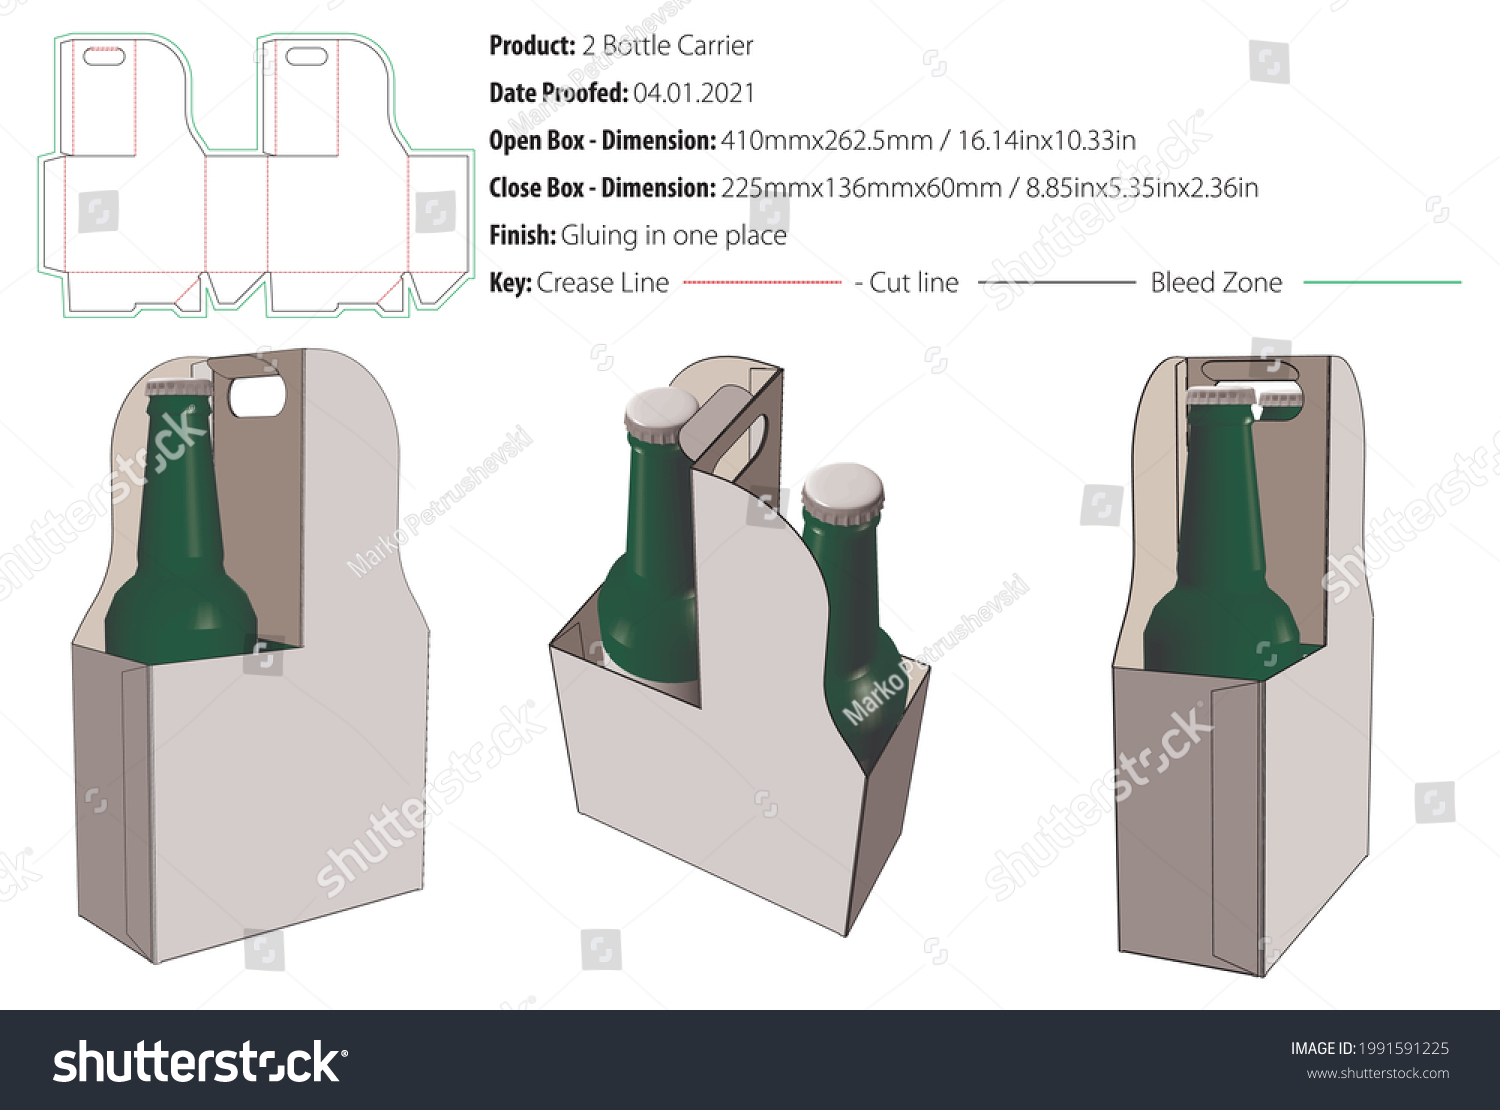 SVG of Two beer bottle's holder with handle on top, crash lock on bottom, packaging design template gluing die cut - vector svg